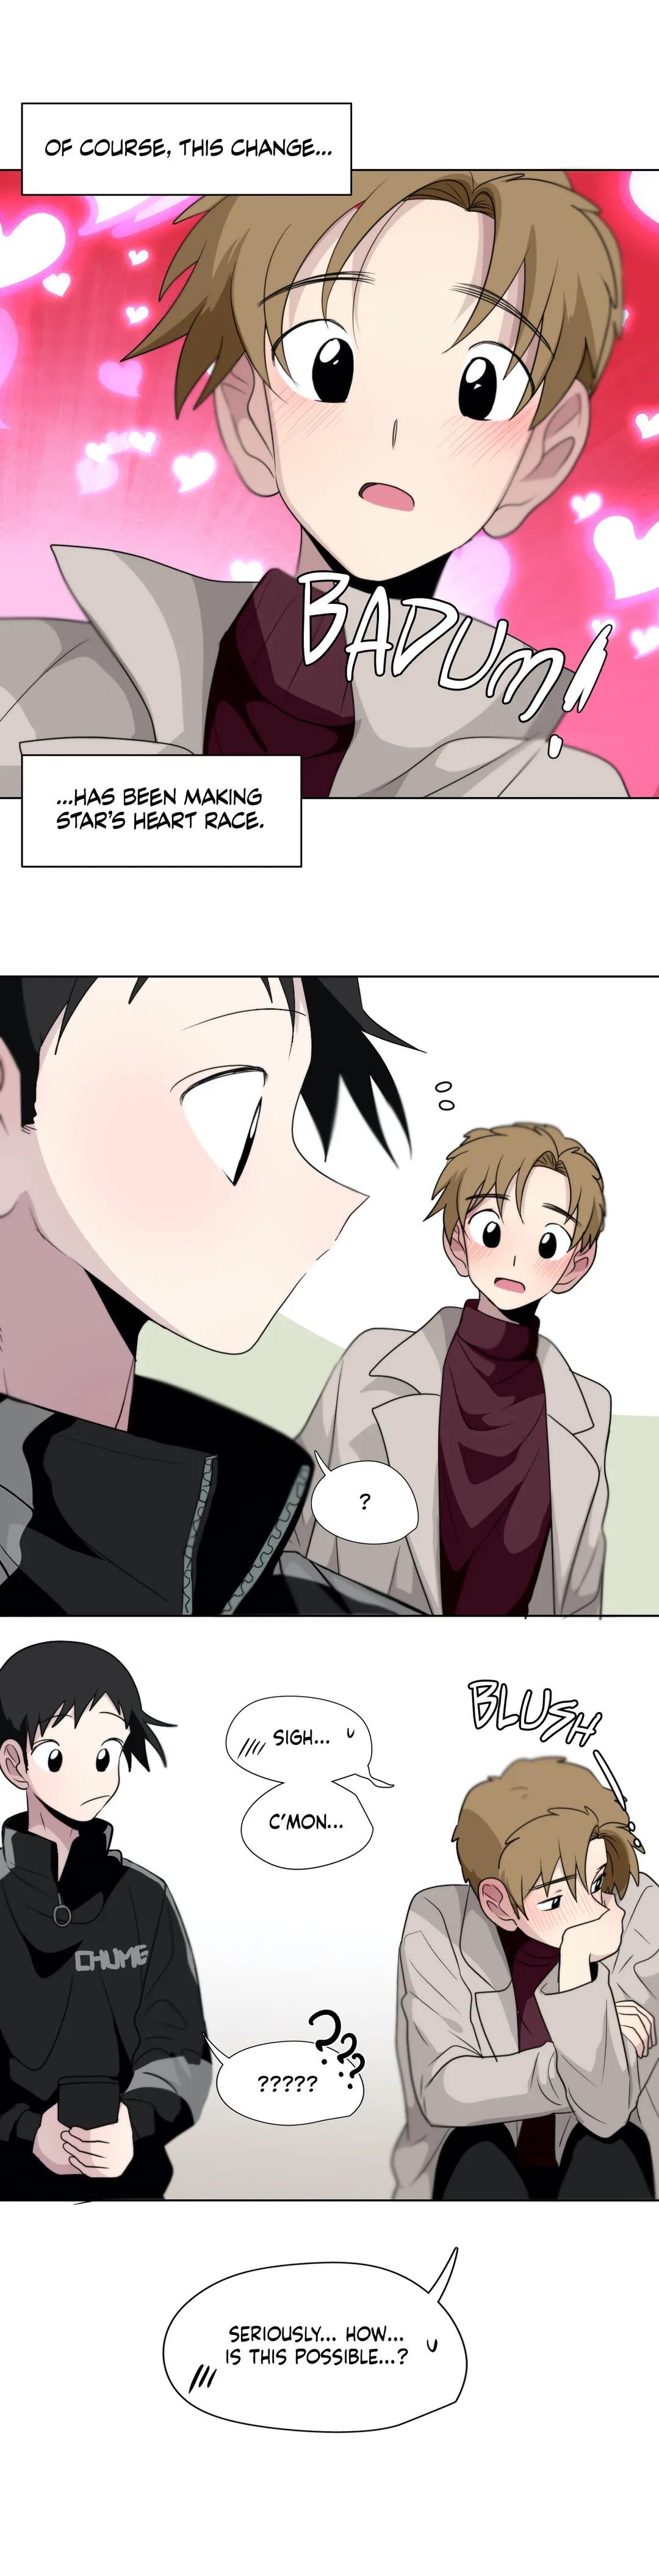 Star x Fanboy - chapter 157 - #3